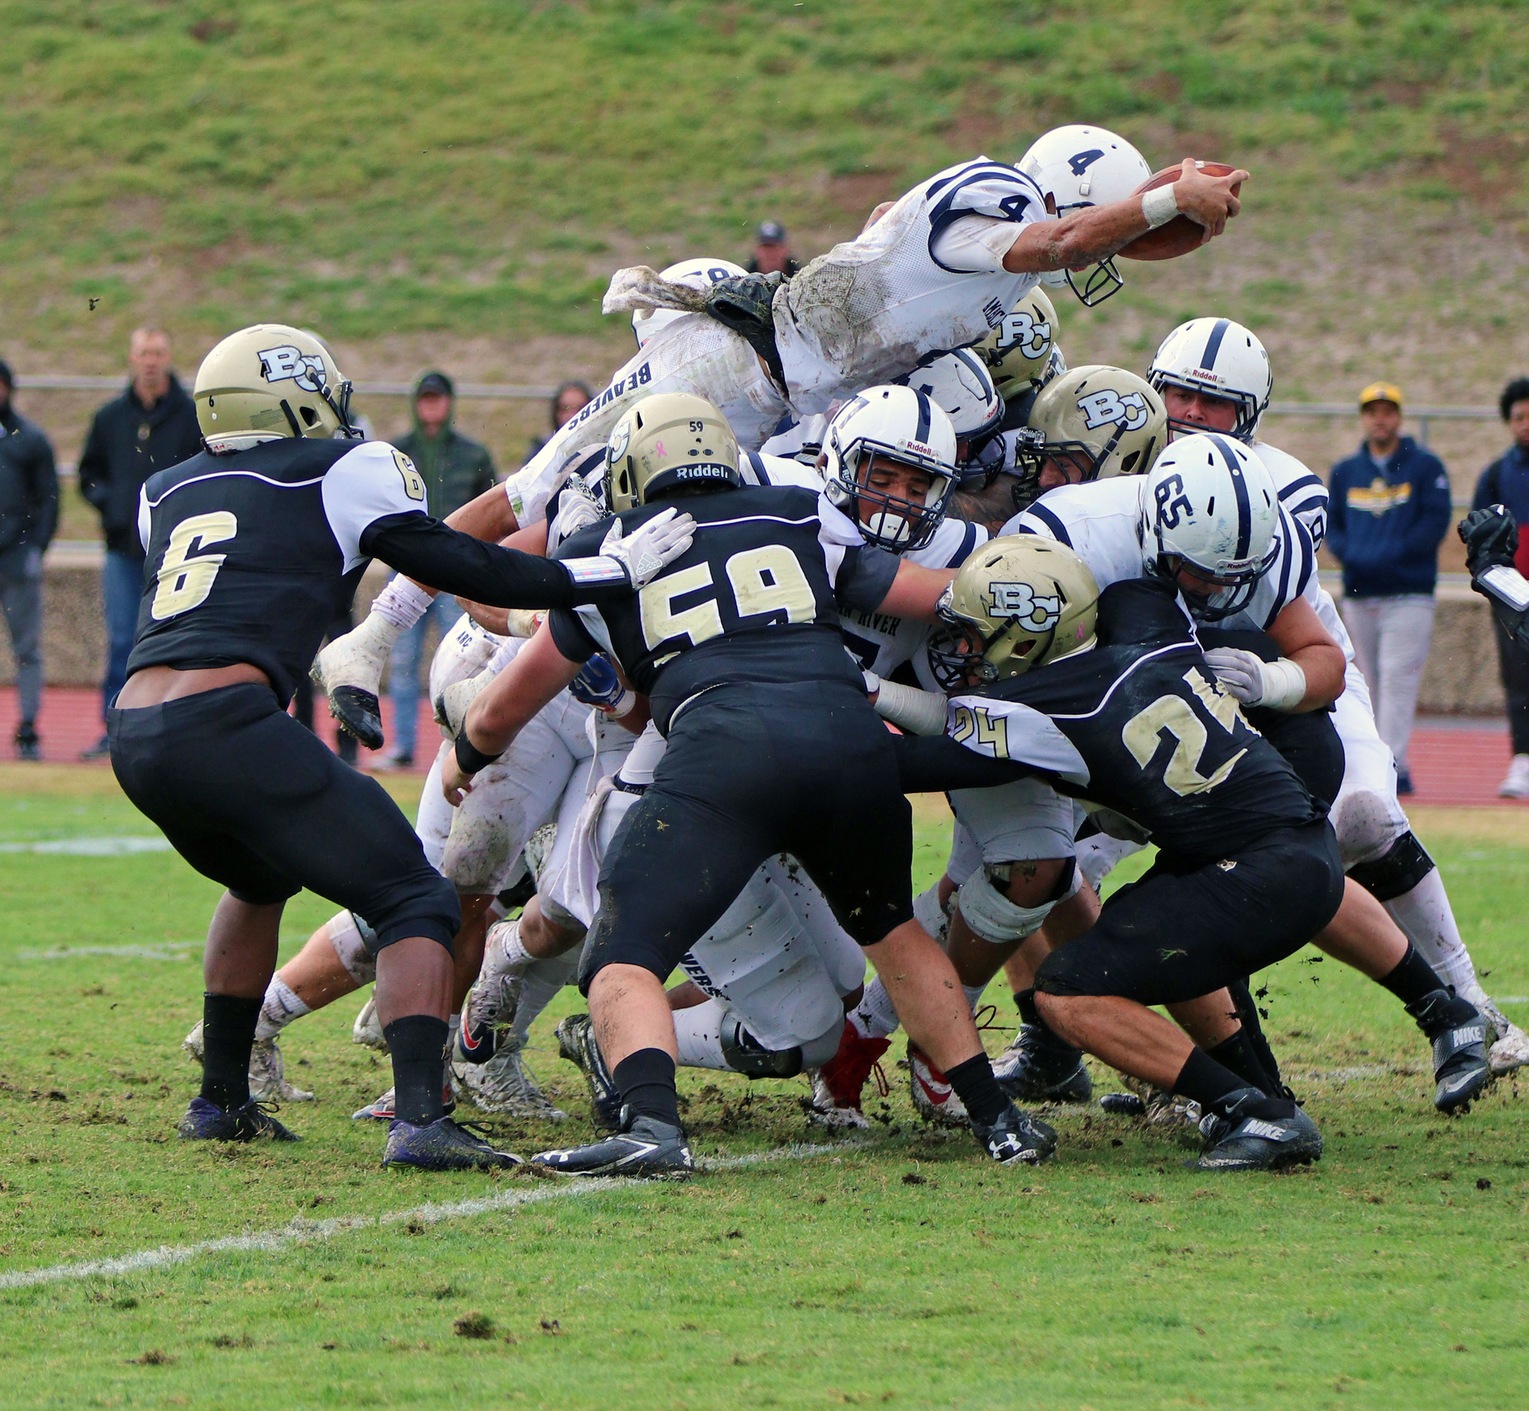 Picture of the team in action. QB is diving for the touch down.